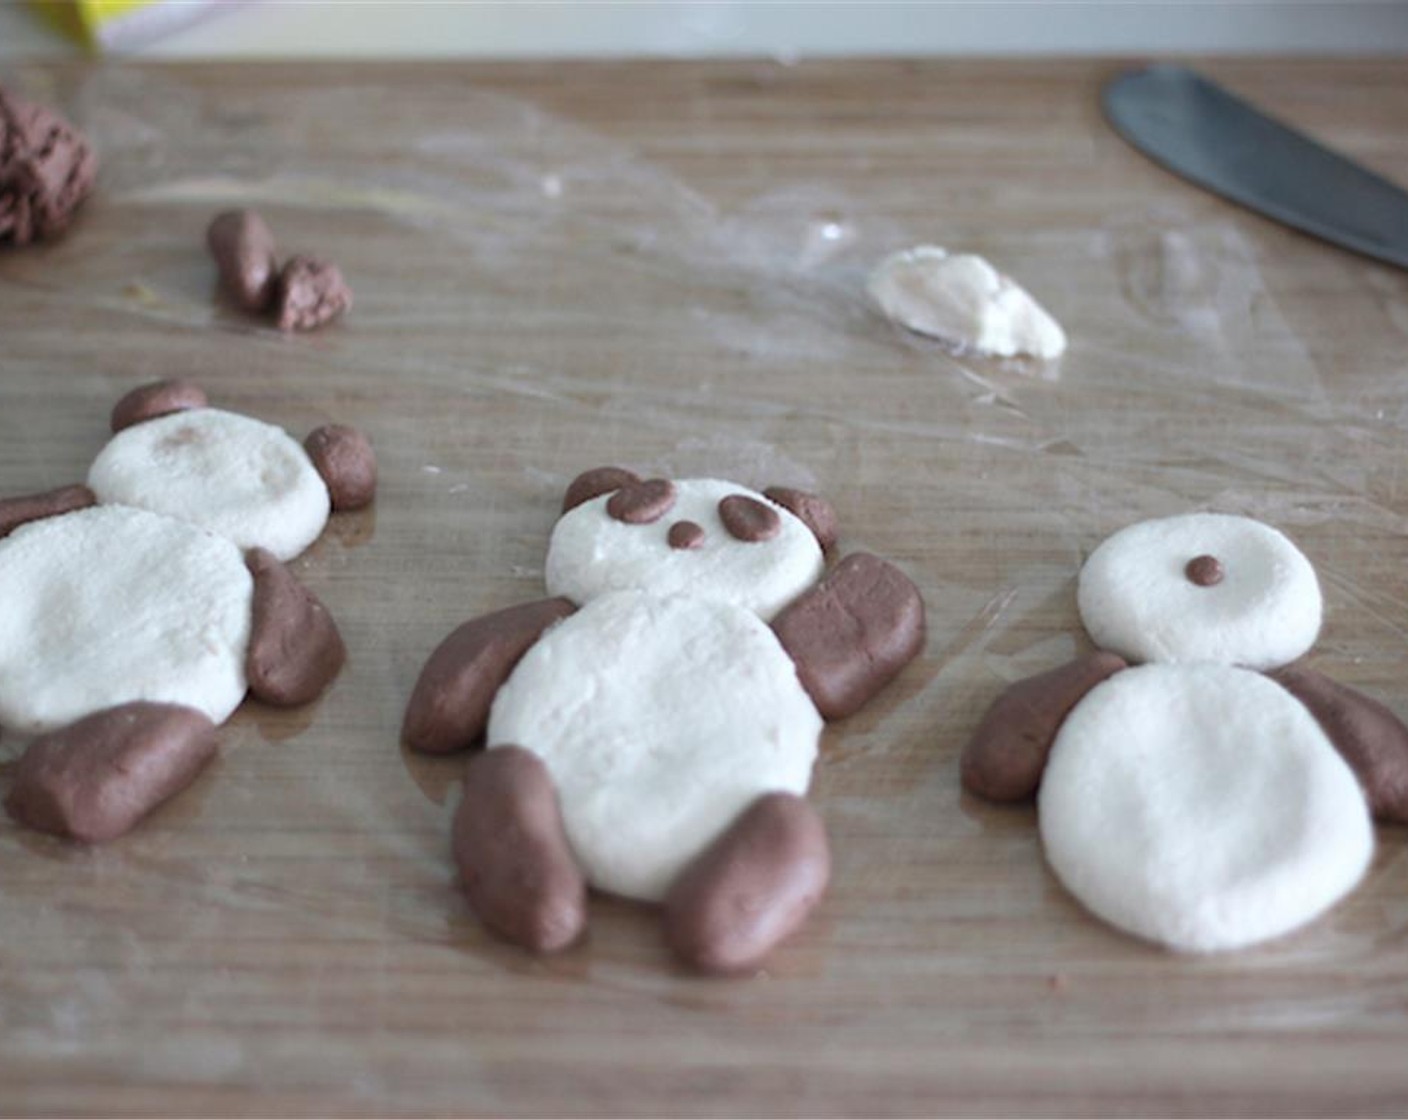 step 4 Make the pandas! When attaching ears to the face or limbs to the body, make sure the dough is sticky enough to stick together, otherwise they might fall apart when boiling. No one likes earless pandas!